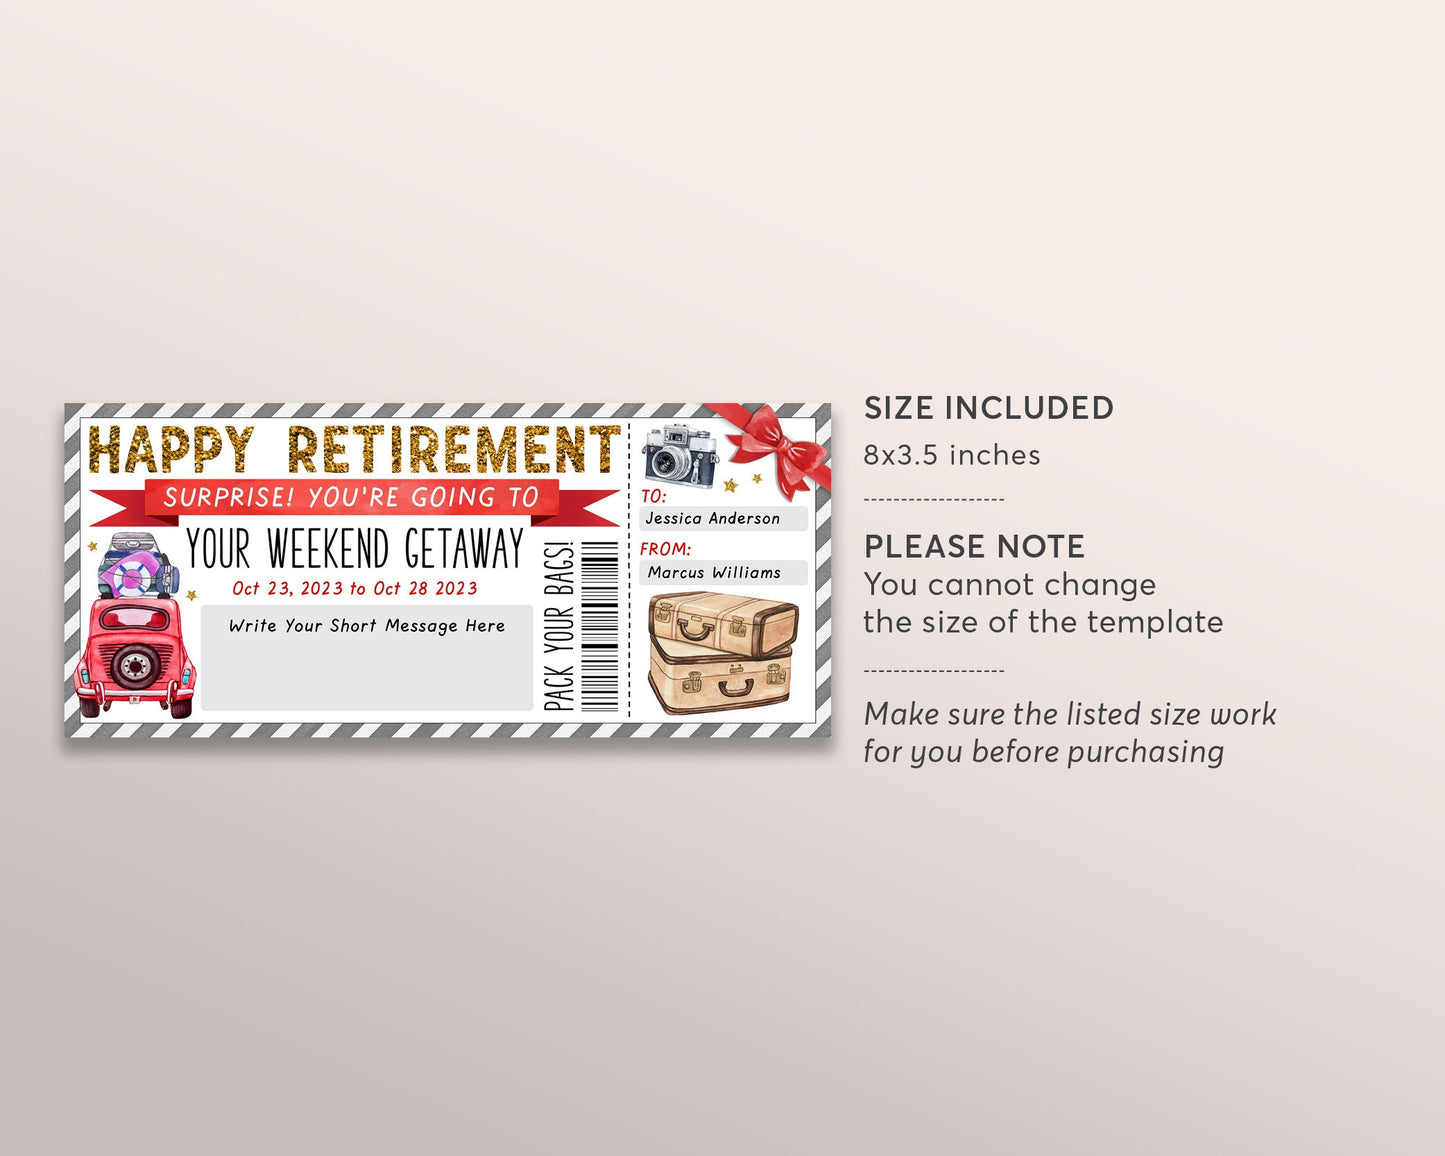 Retirement Weekend Getaway Voucher Editable Template, Surprise Vacation Travel Ticket Gift Certificate For Retiree, Holiday Trip Staycation